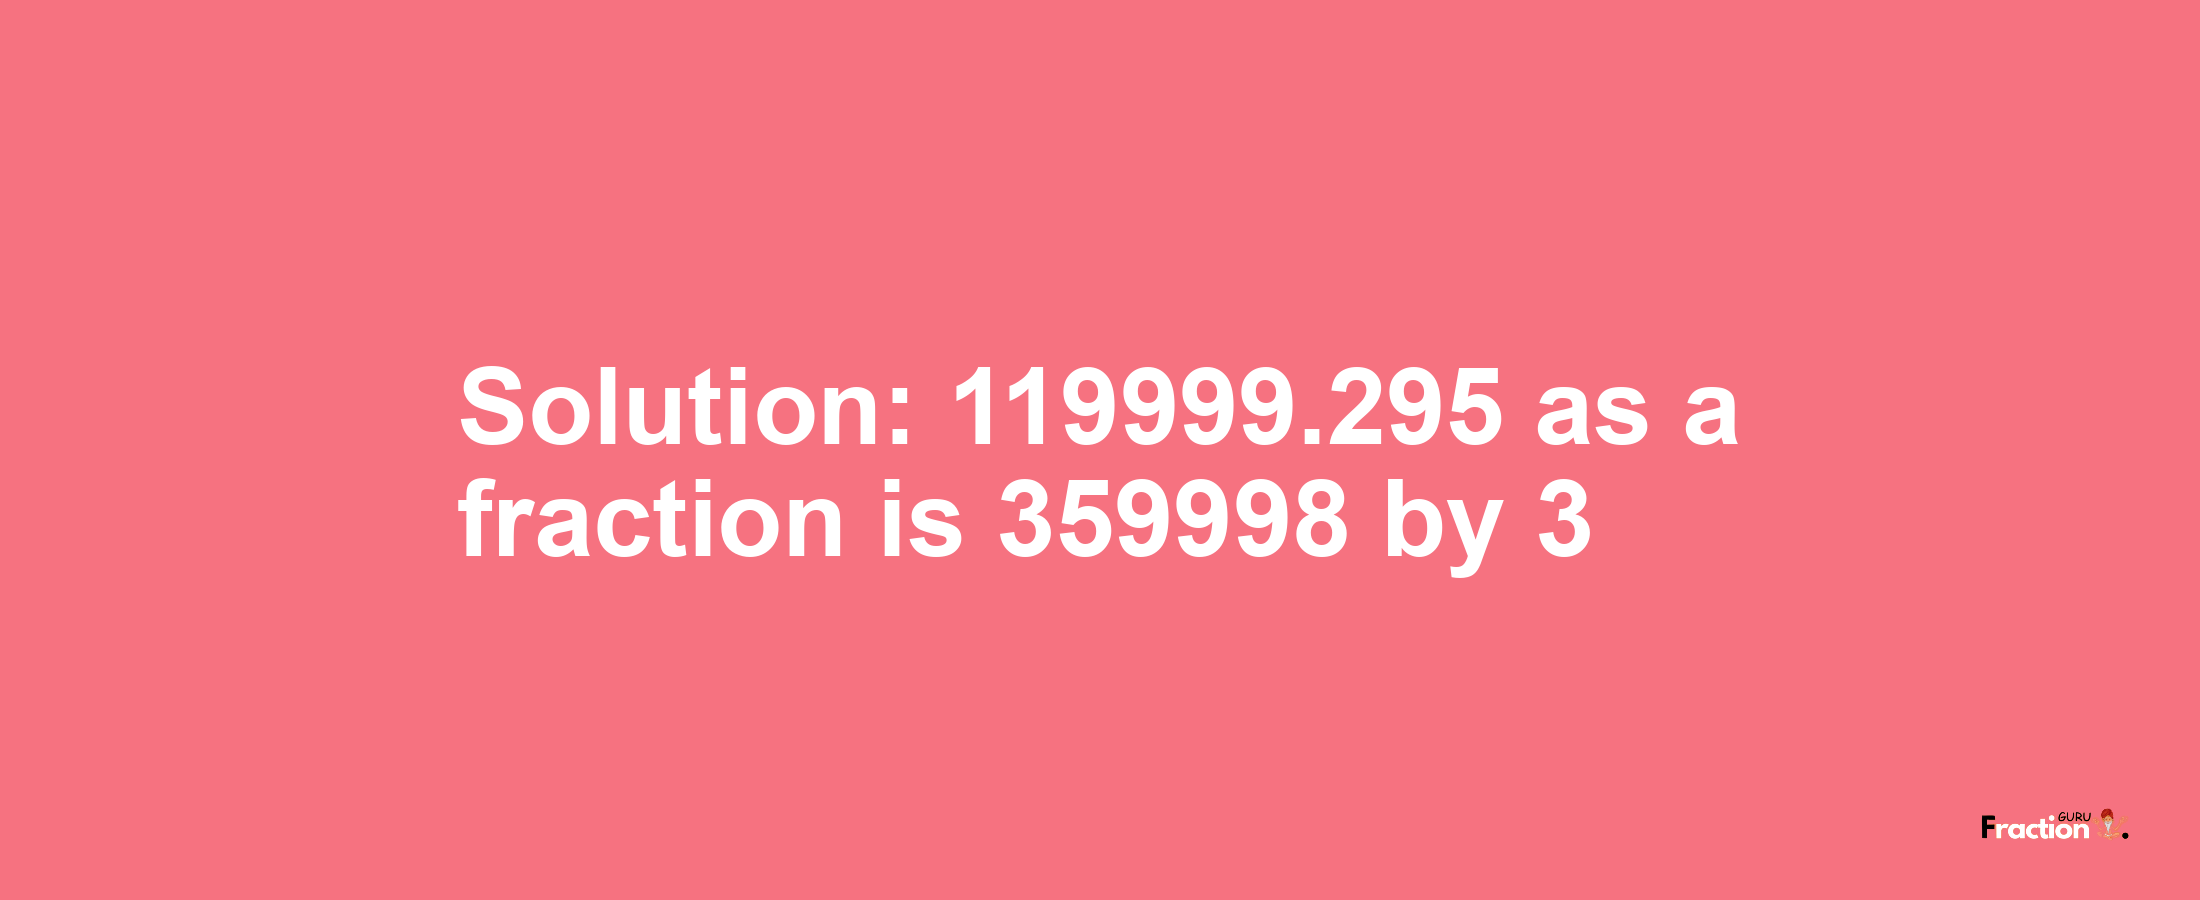 Solution:119999.295 as a fraction is 359998/3